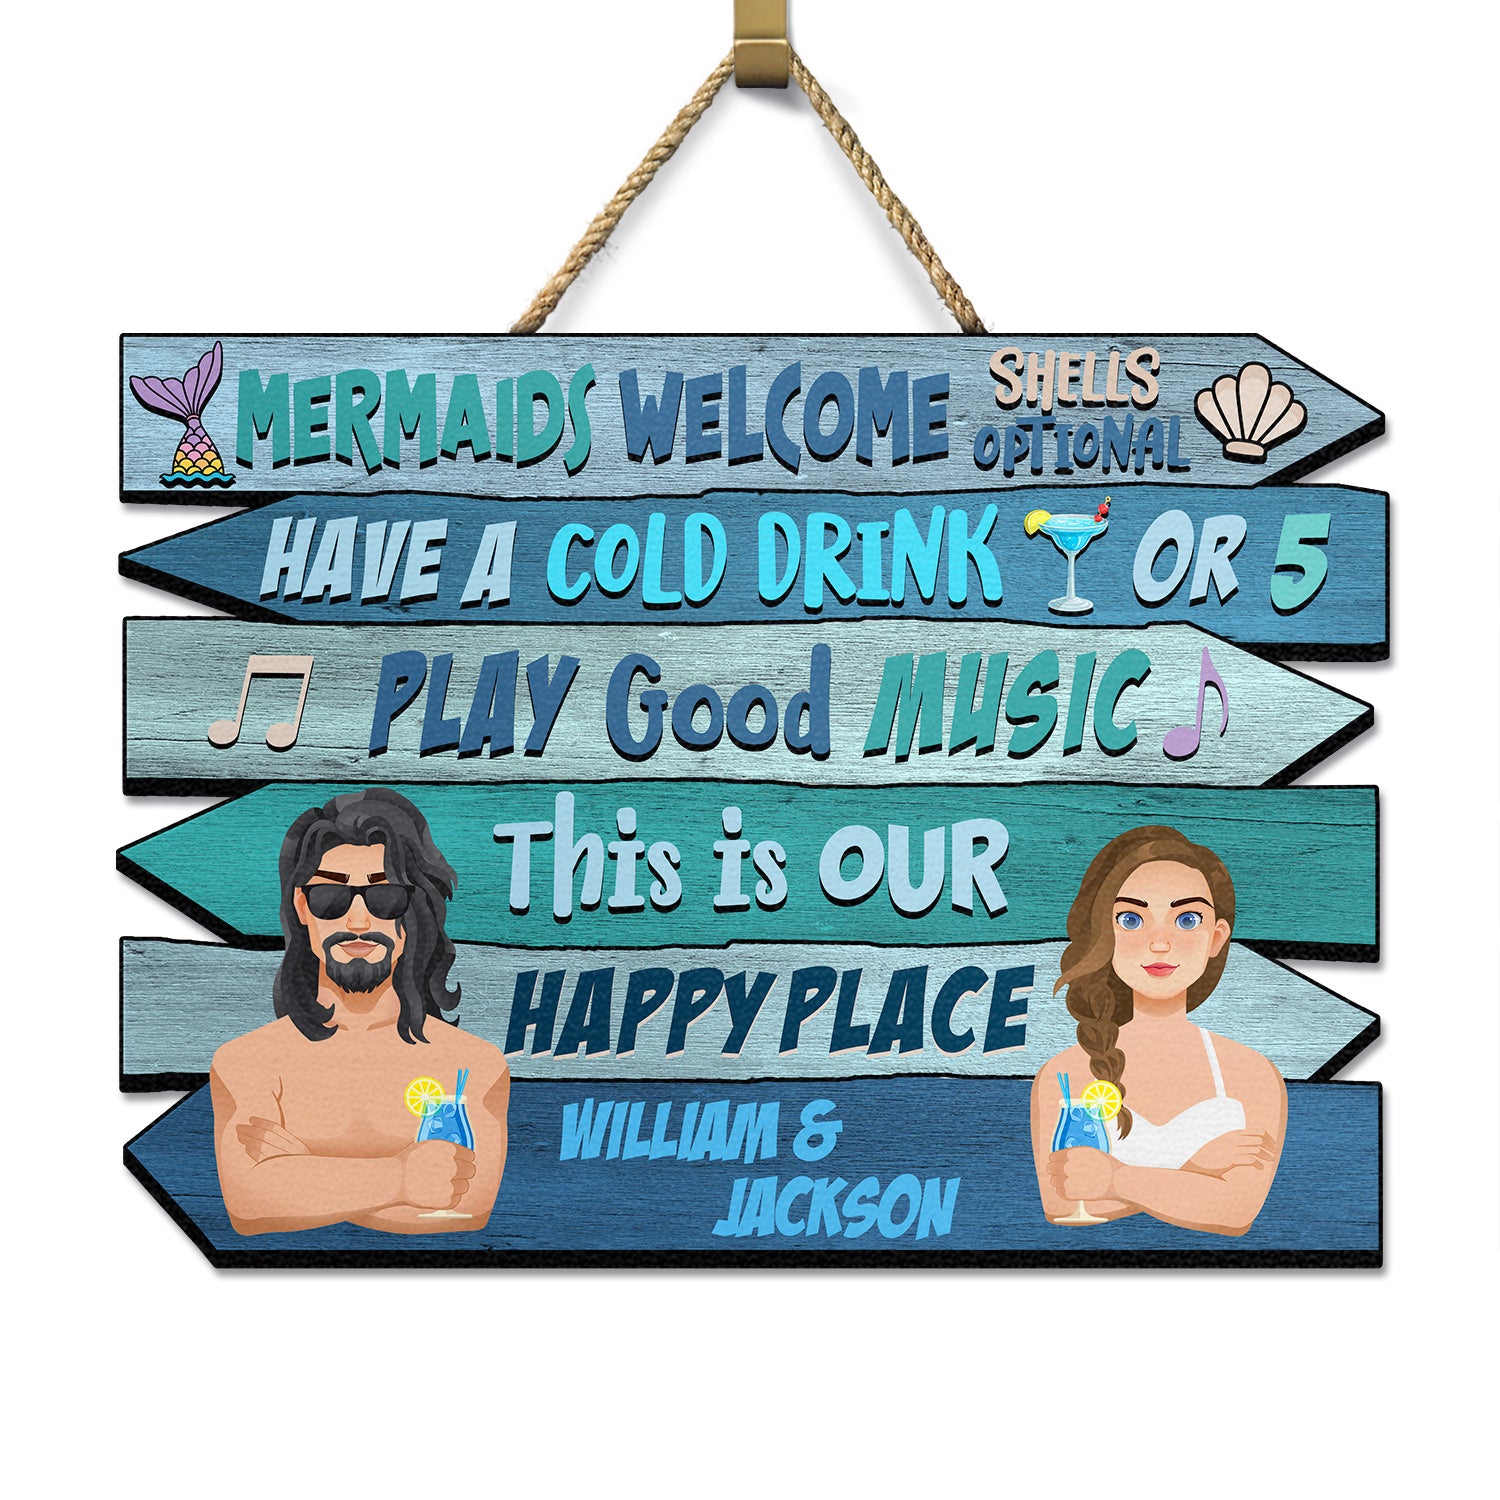 Mermaids Welcome - Swimming Pool Decoration For Couples - Personalized Custom Shaped Wood Sign